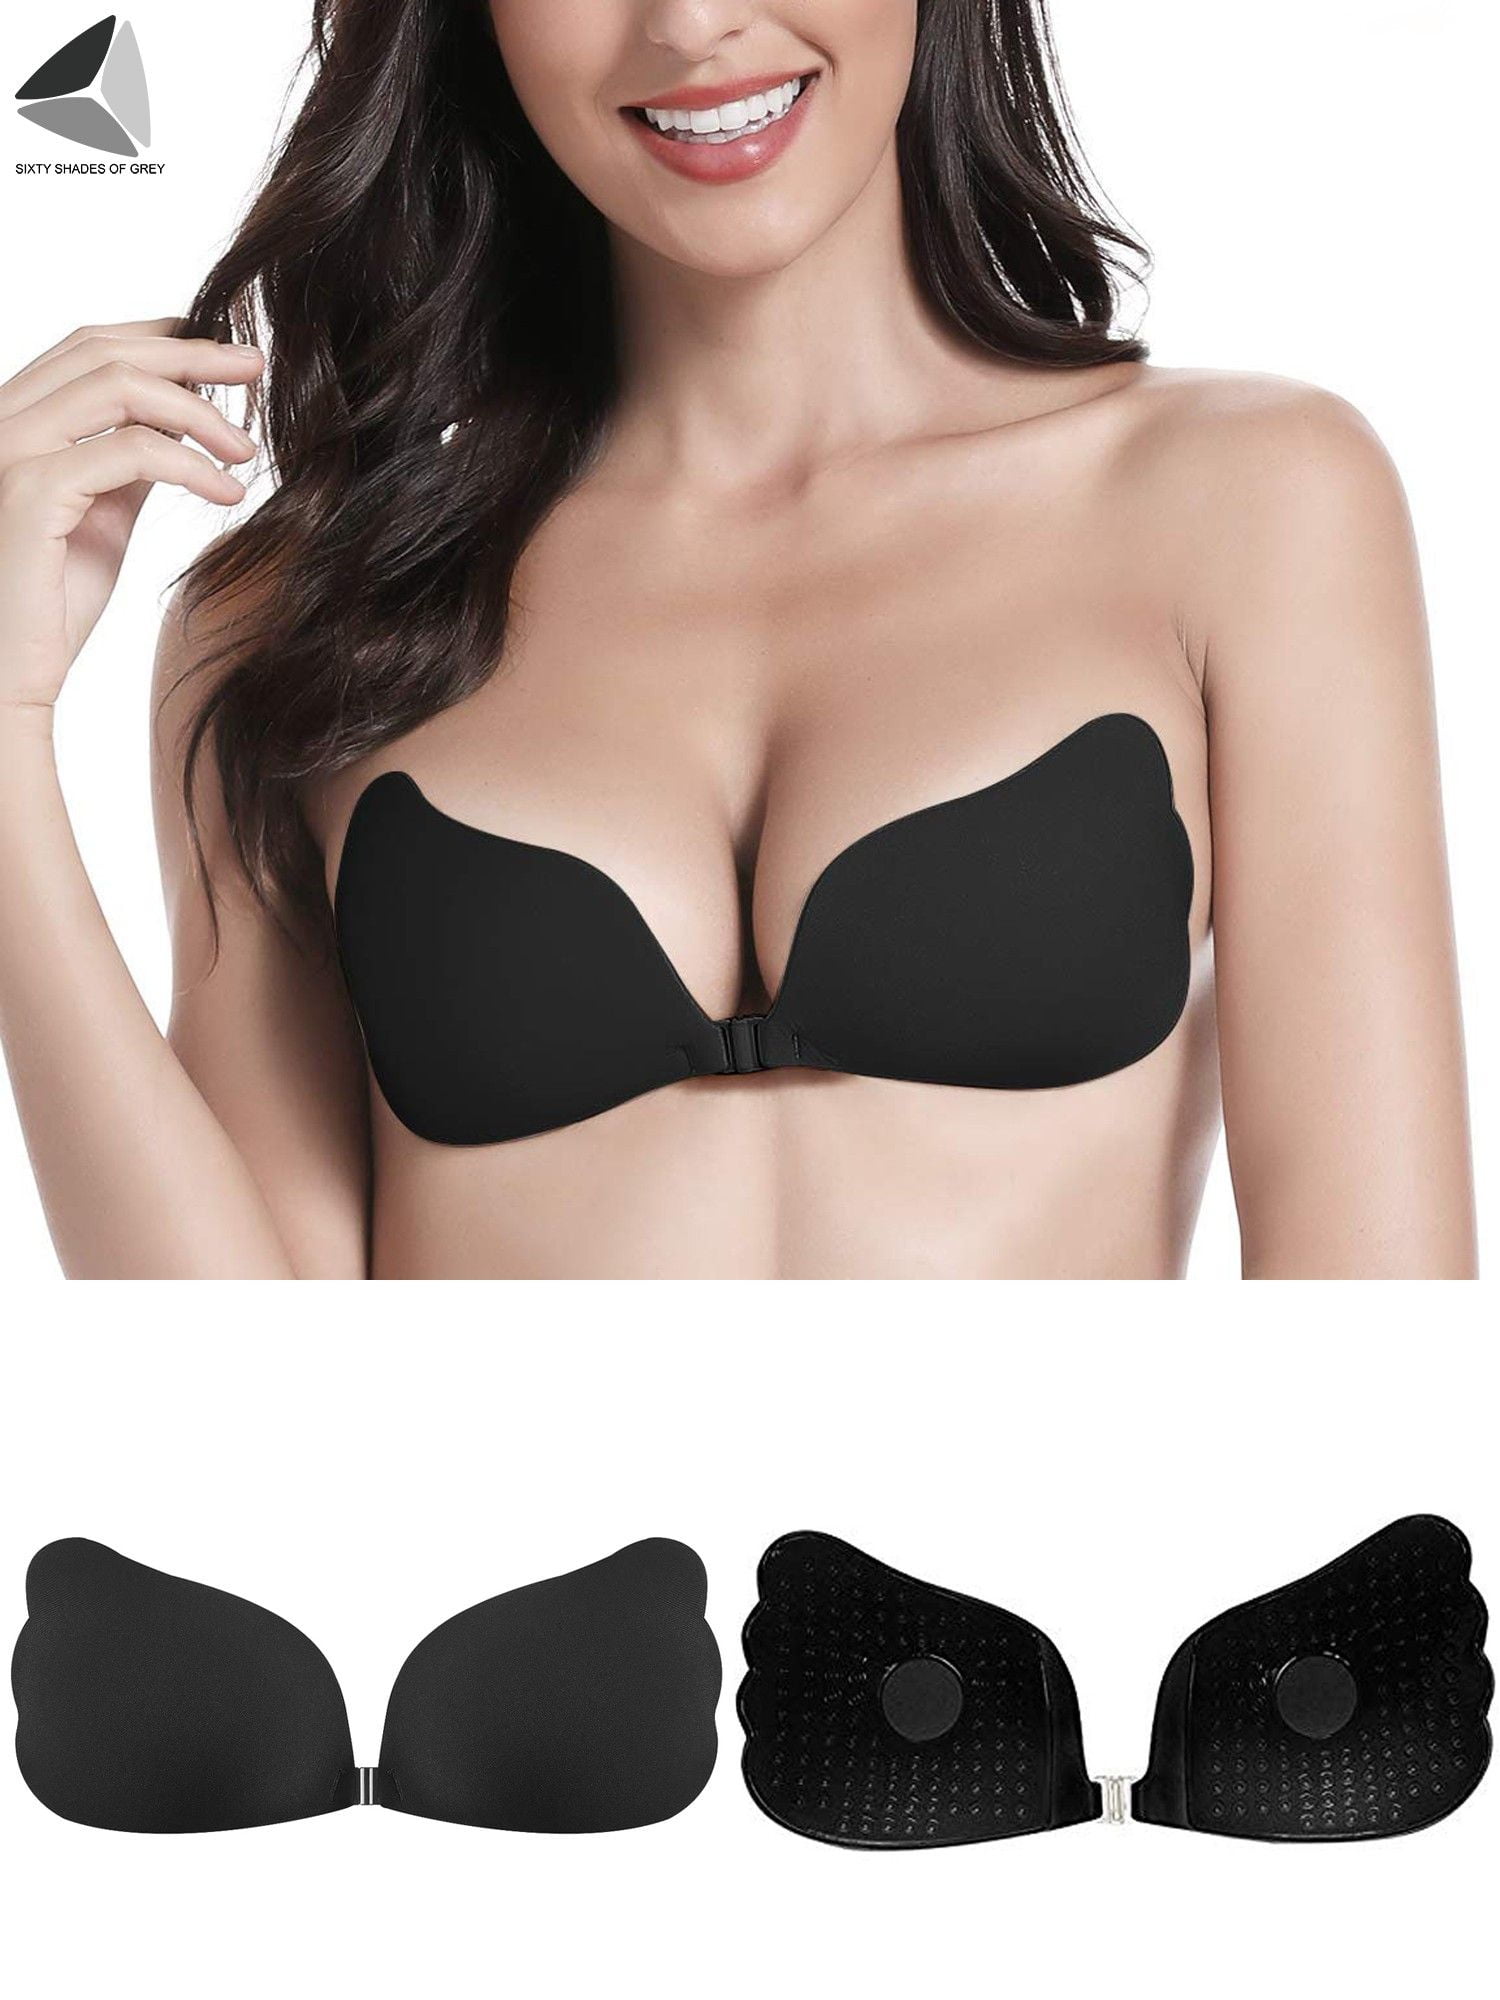 PULLIMORE Women Self Adhesive Invisible Bras Butterfly Wings Strapless Push  Up Chest Stickers For Dress Halter (Cup A, Black) 